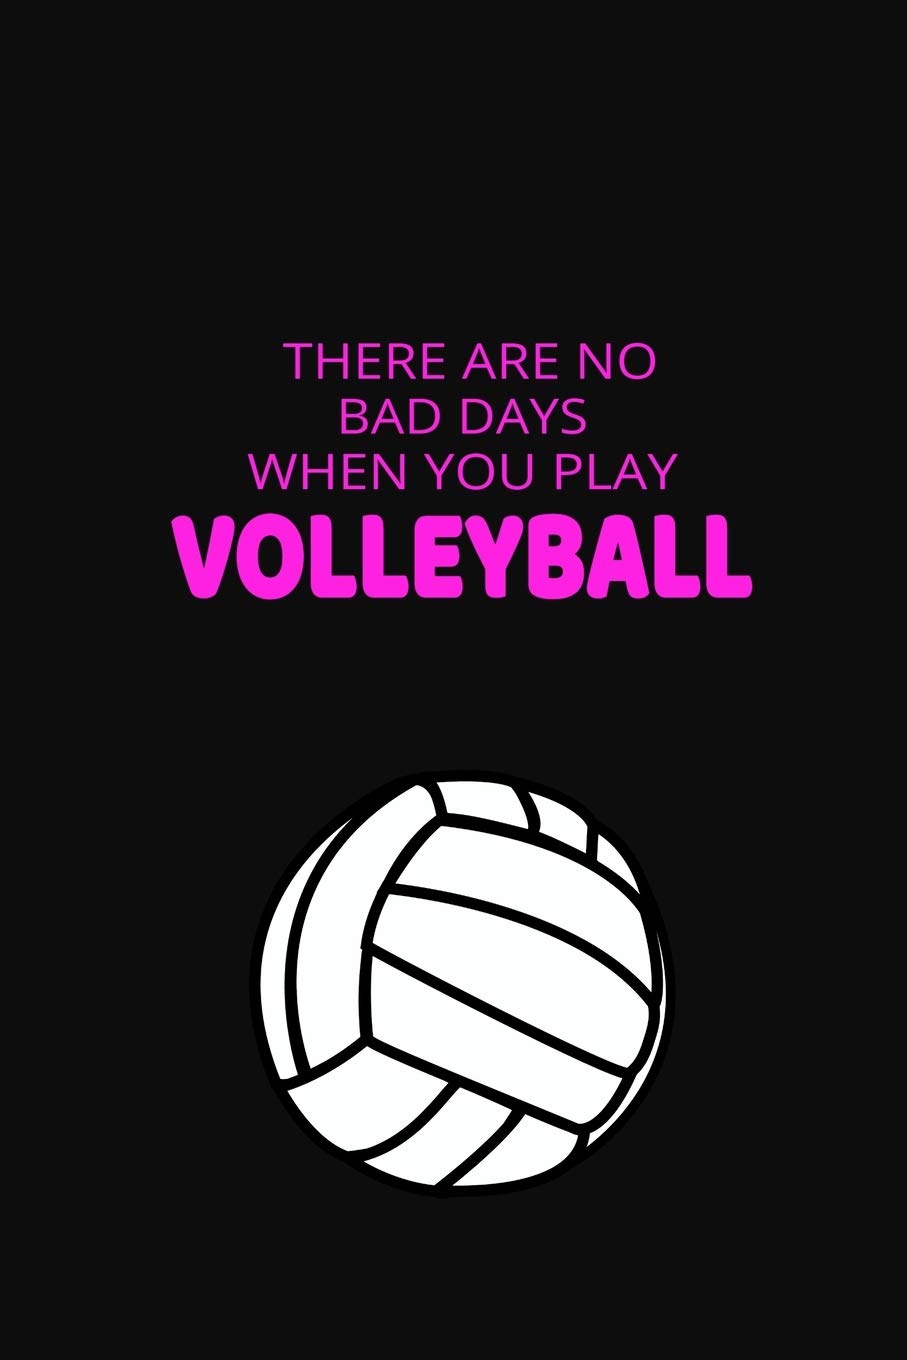 There are no days off when you play volleyball - Volleyball